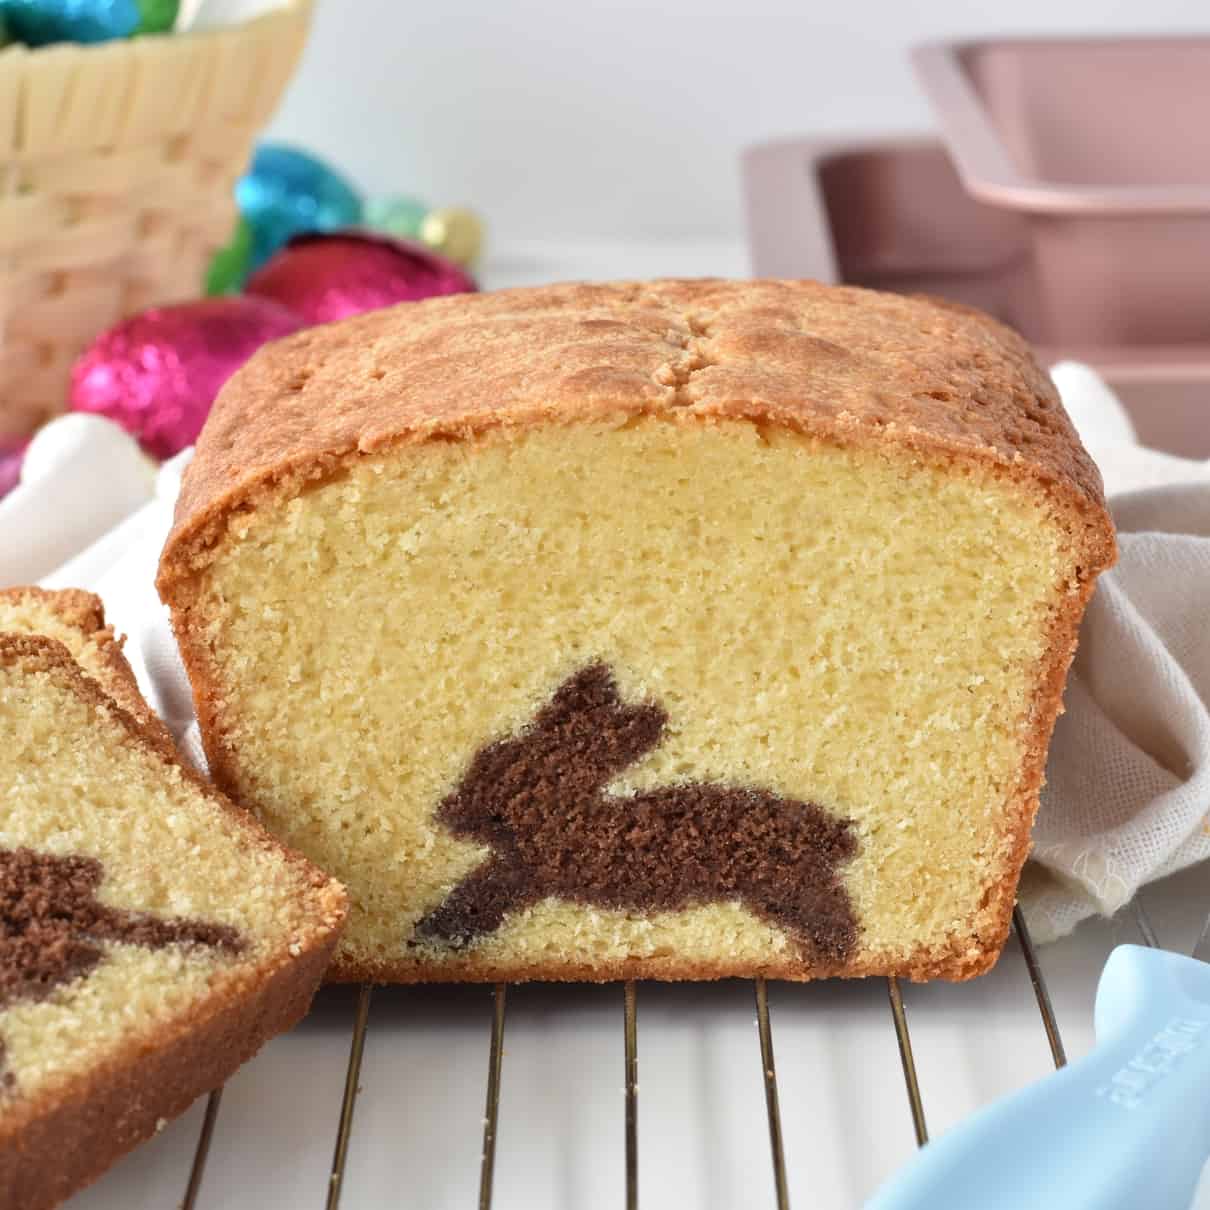 Bunny loaf with slice cut out.